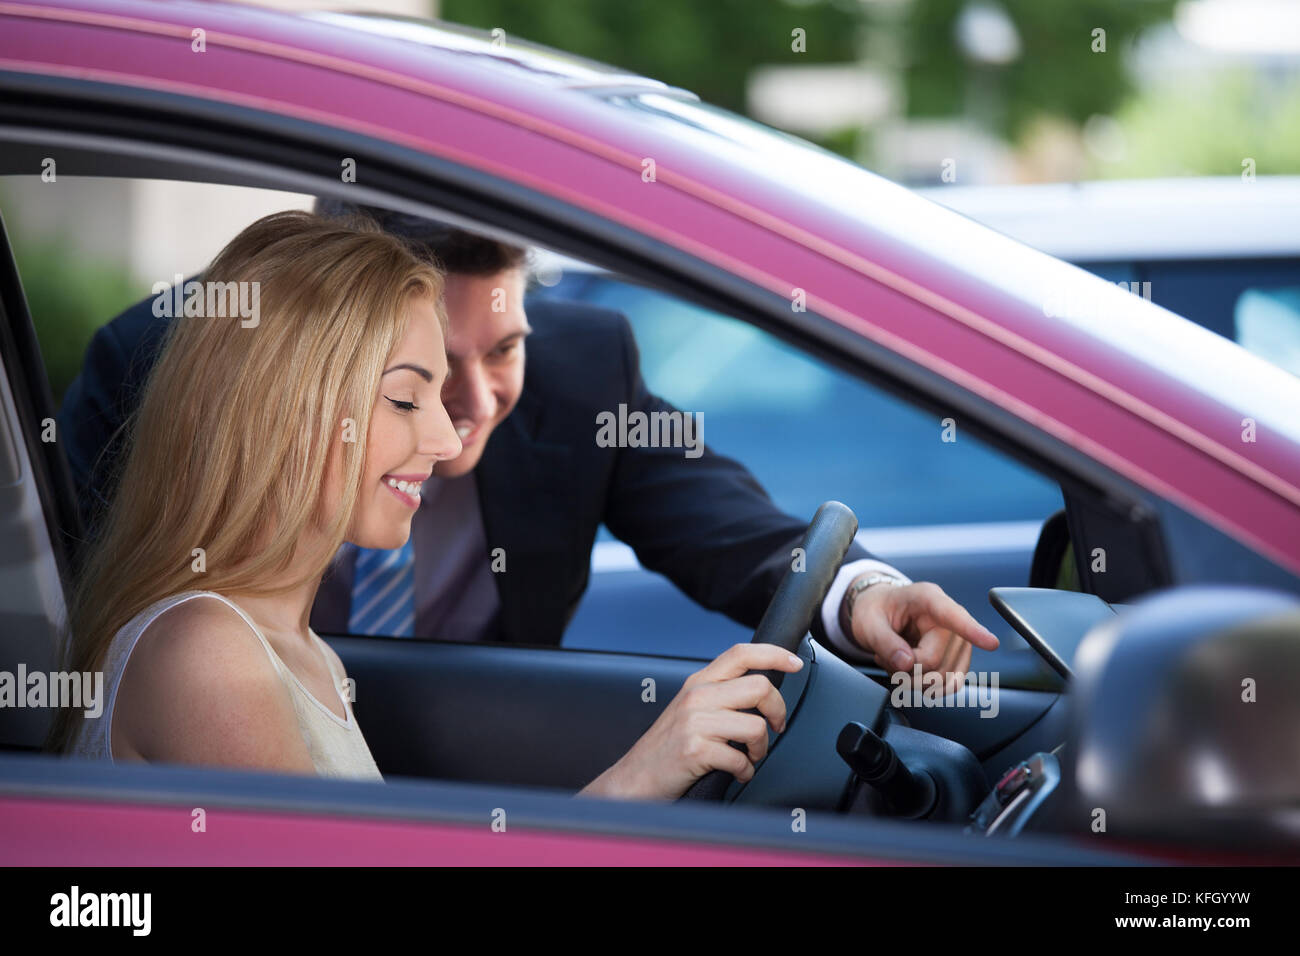 Salesman showing new car to female customer Stock Photo